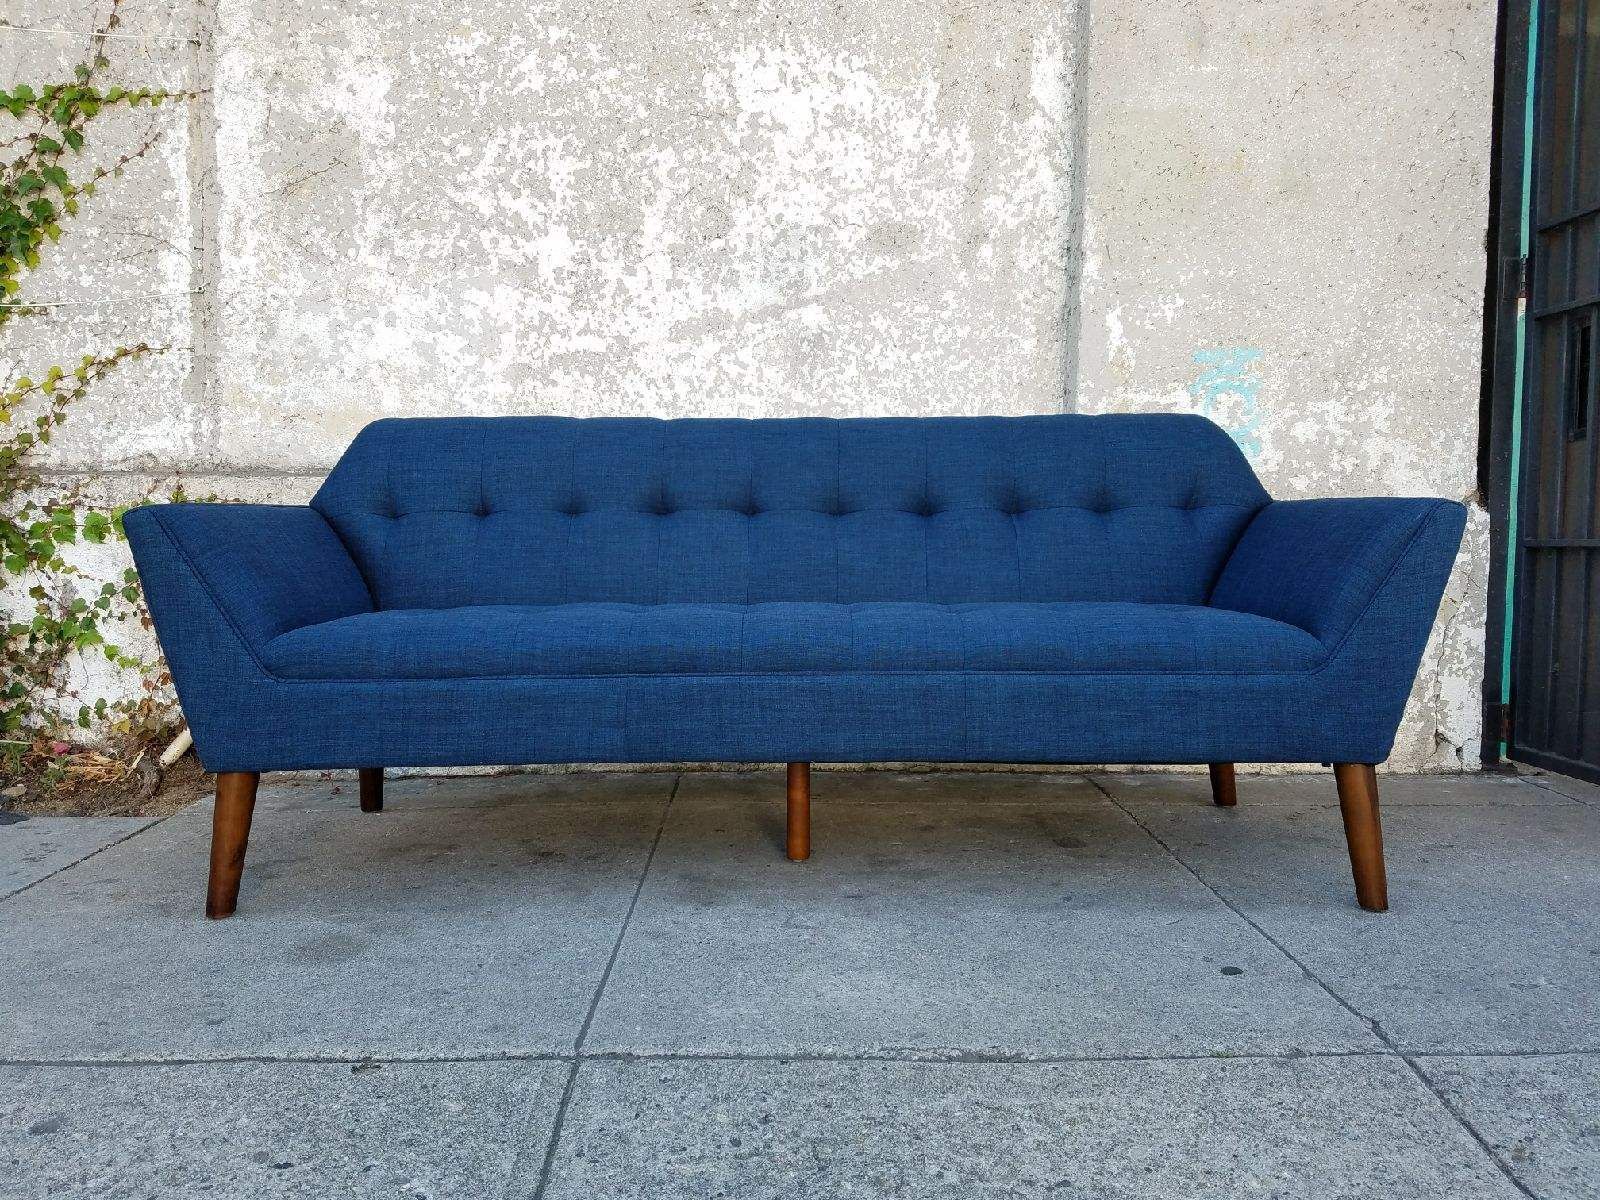 Downtown Navy Blue Sofa | Furniture, Navy Blue Sofa, Blue Sofa Intended For Dove Mid Century Sectional Sofas Dark Blue (View 5 of 15)